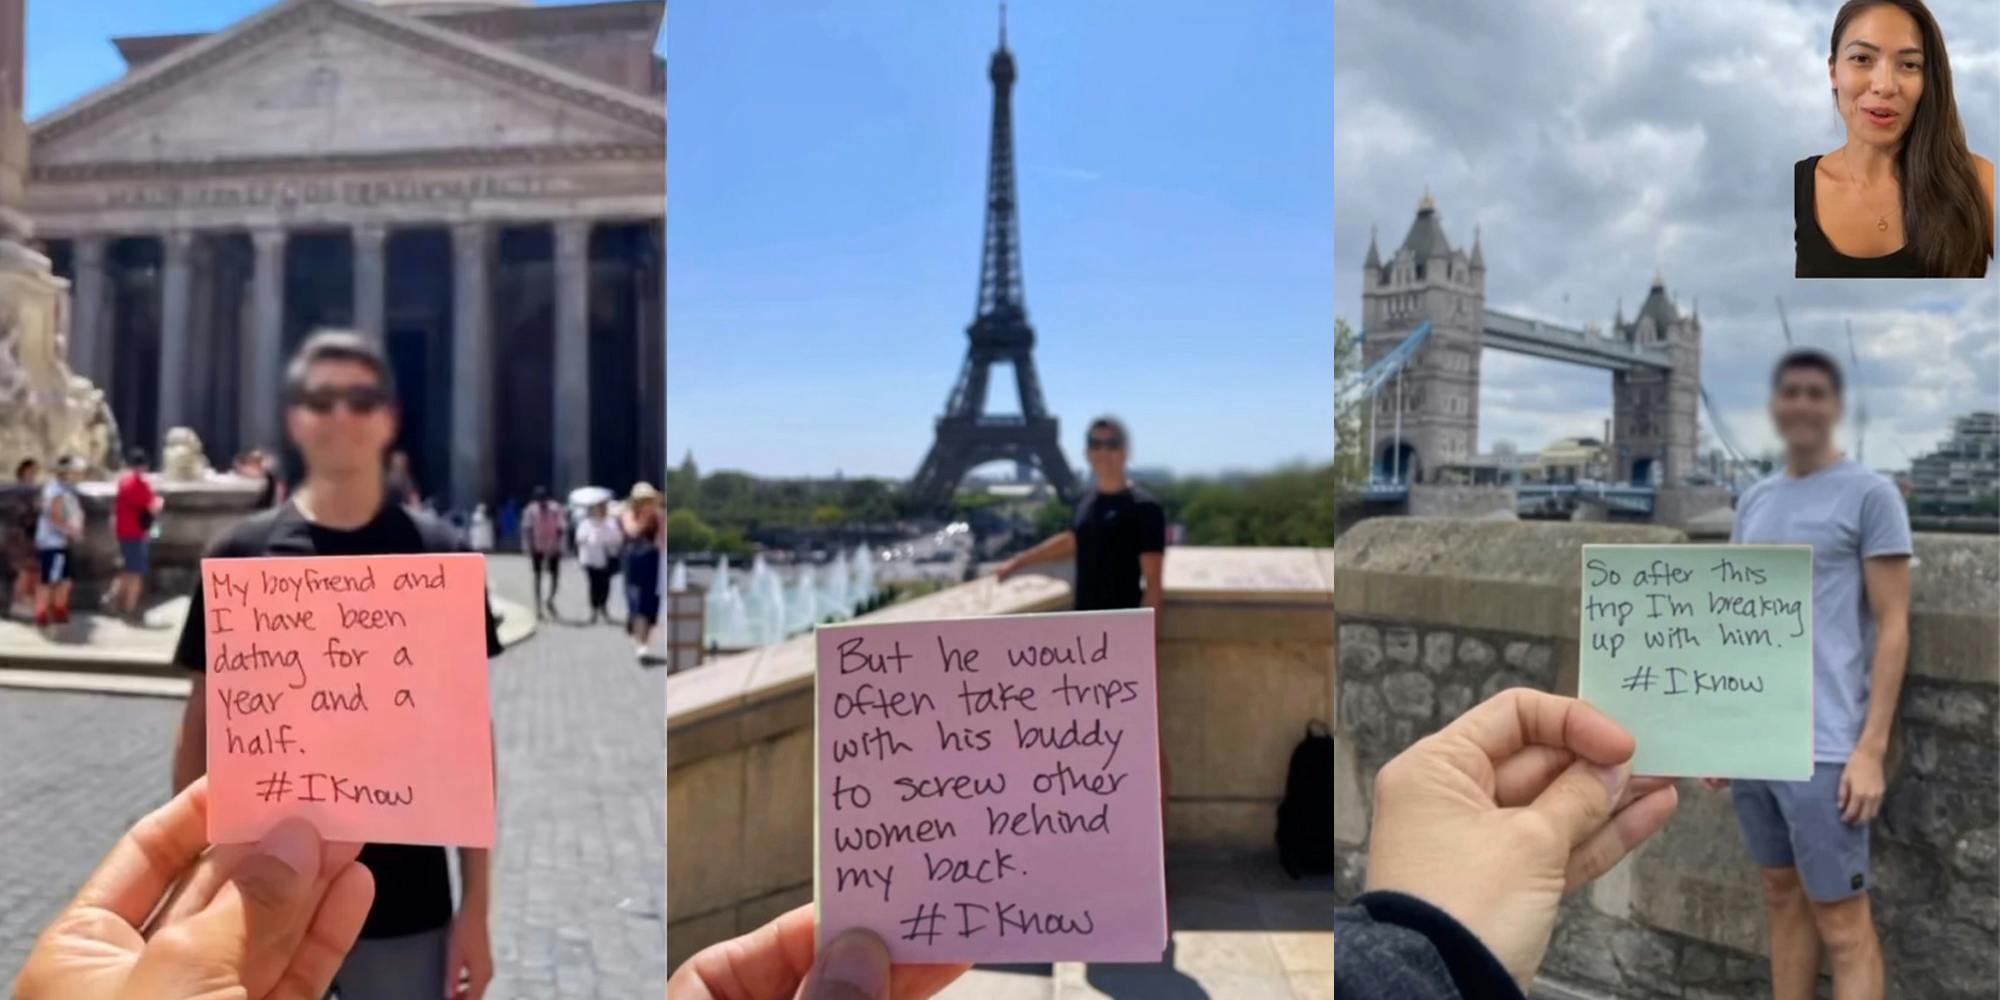 woman holding note in front of bf on vacation with message "My boyfriend and I have been dating for a year and a half. #IKnow (l) woman holding note in front of bf on vacation with message "But he would often take trips with his buddy to screw other women behind my back. #IKnow" (c) woman holding note in front of bf on vacation with message "So after this trip I'm breaking up with him. #IKnow" (r)